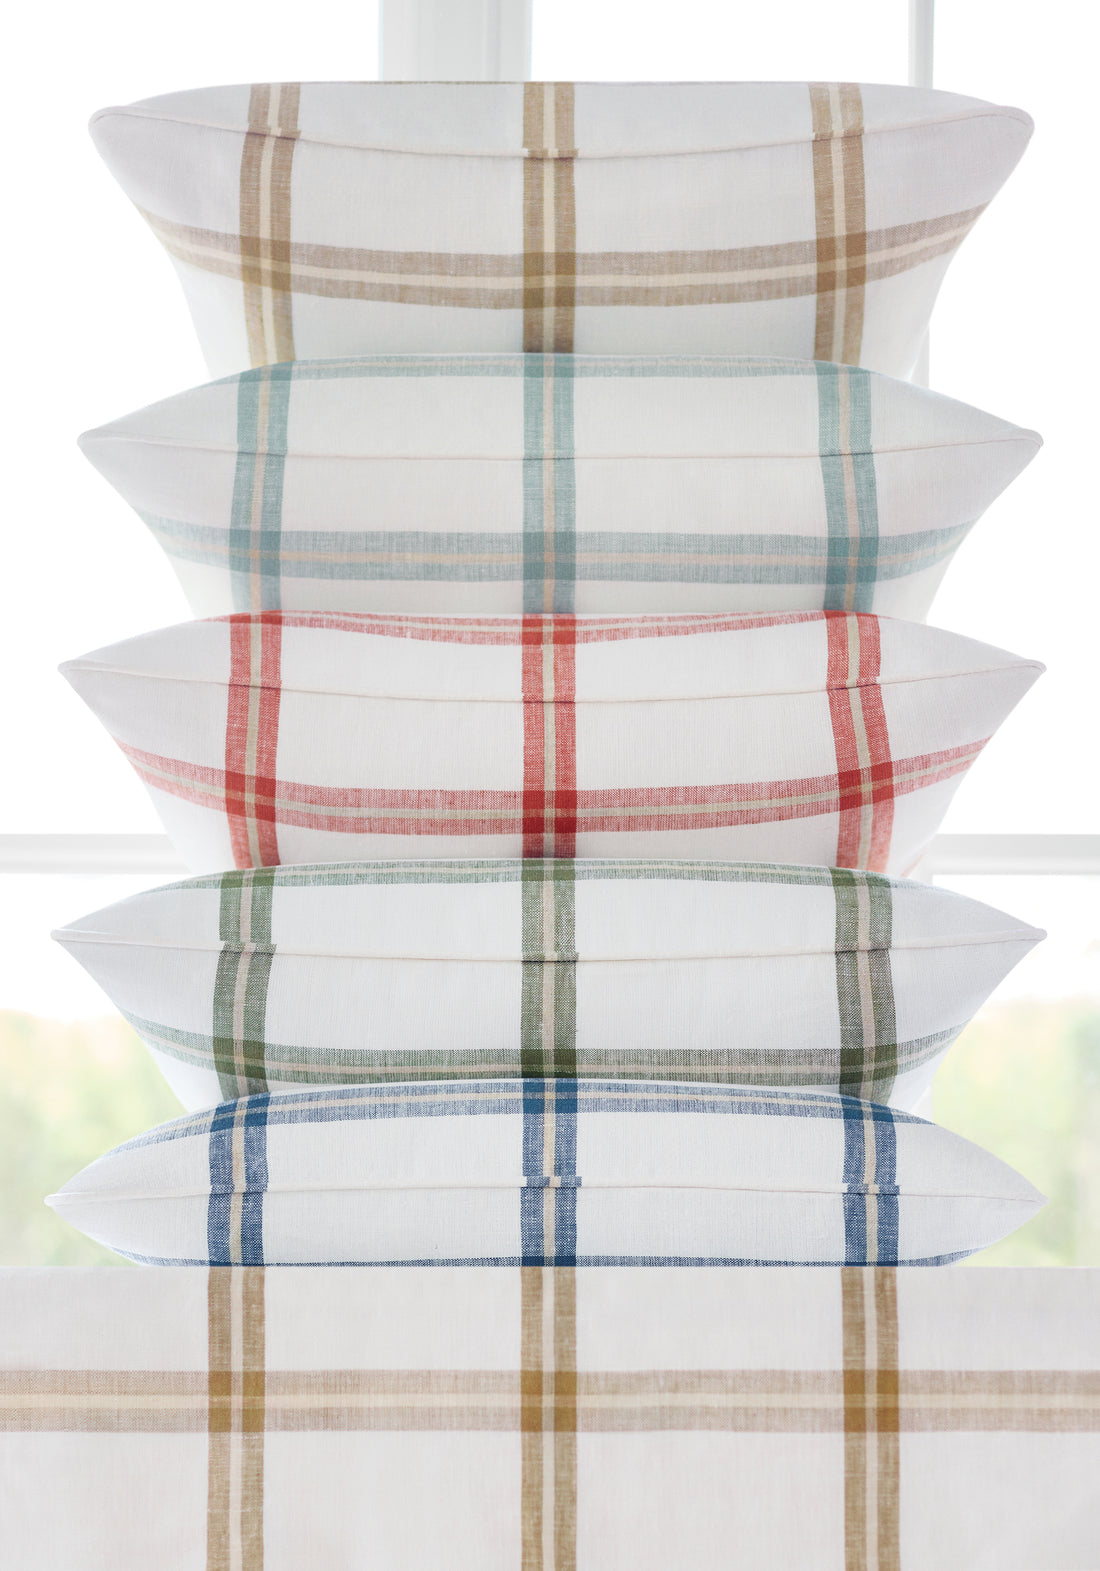 Huntington Plaid fabric in seaglass color - pattern number W781335 - by Thibaut in the Montecito collection